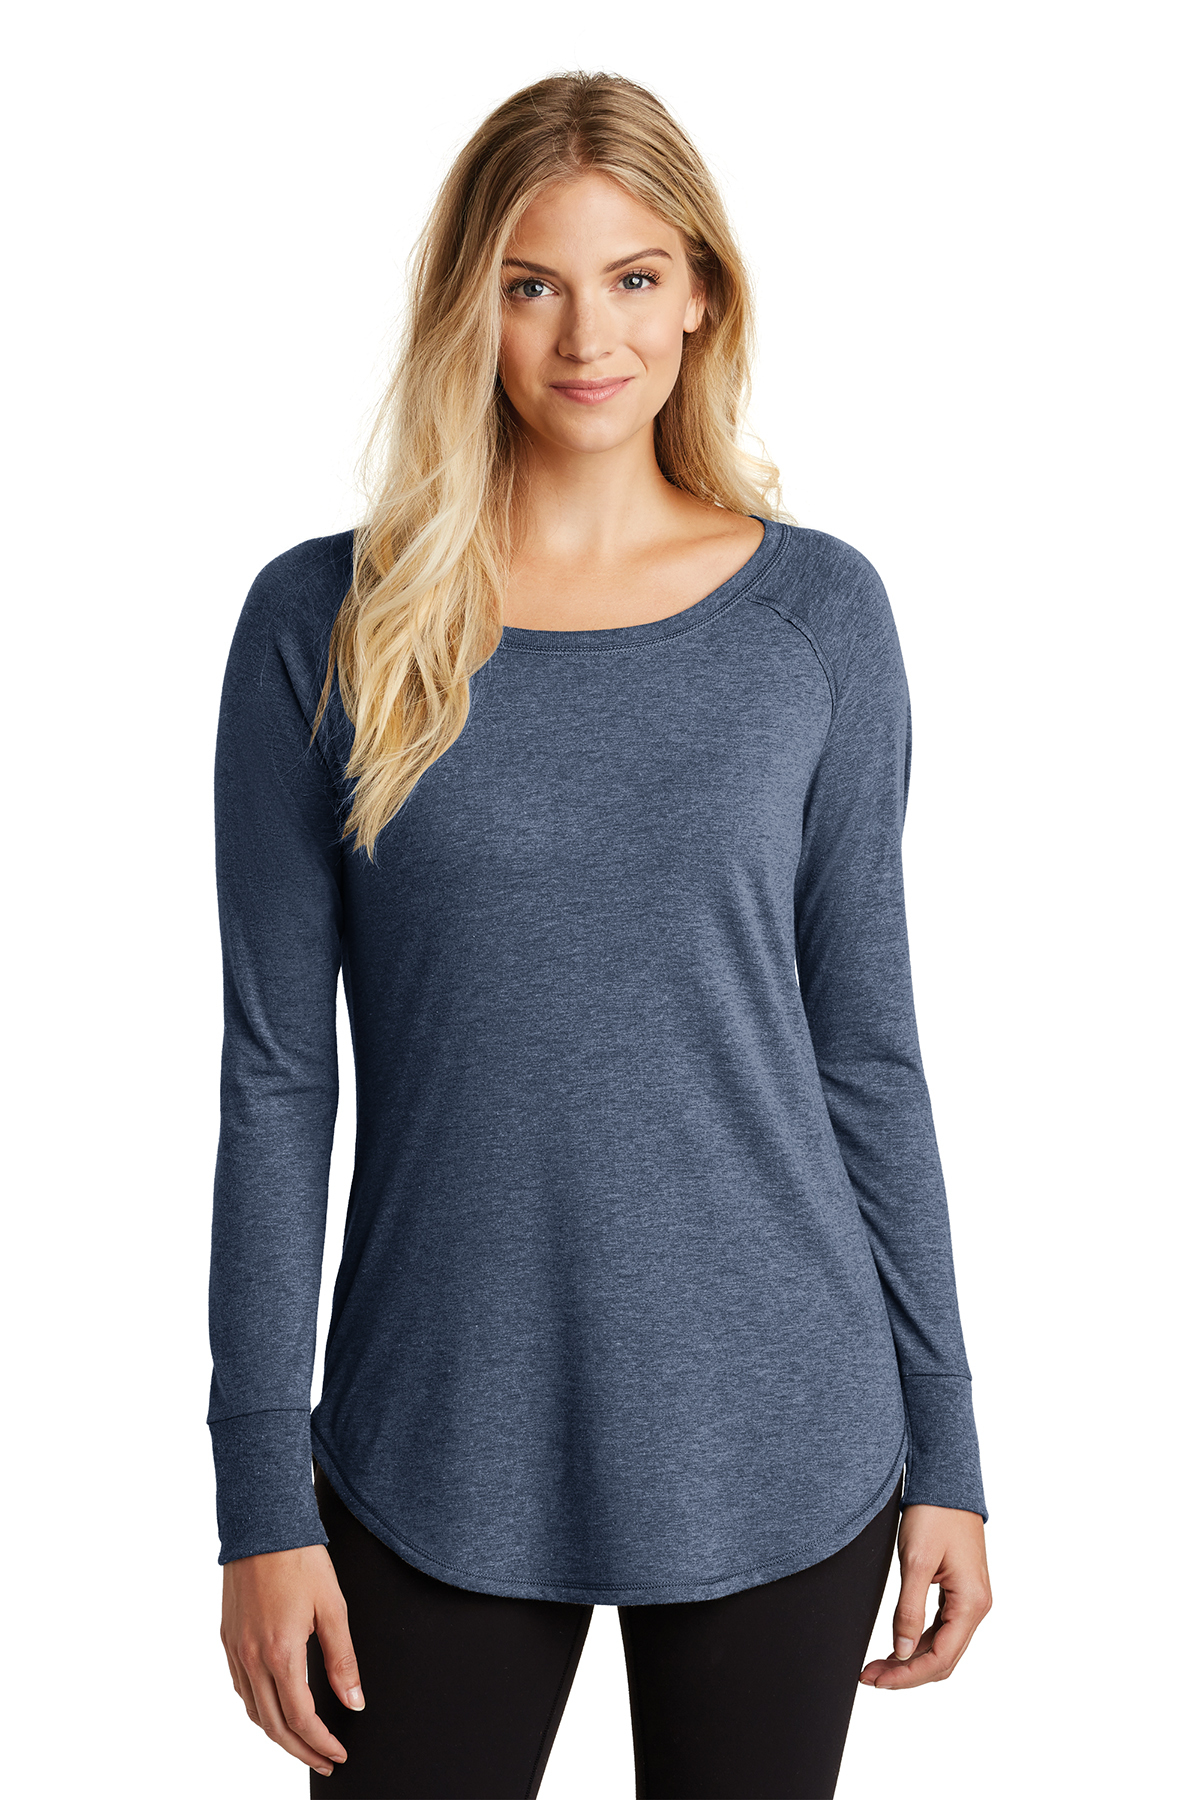 District DT132L - Ladies Perfect Tri Long Sleeve Tunic $9.01 - T-Shirts